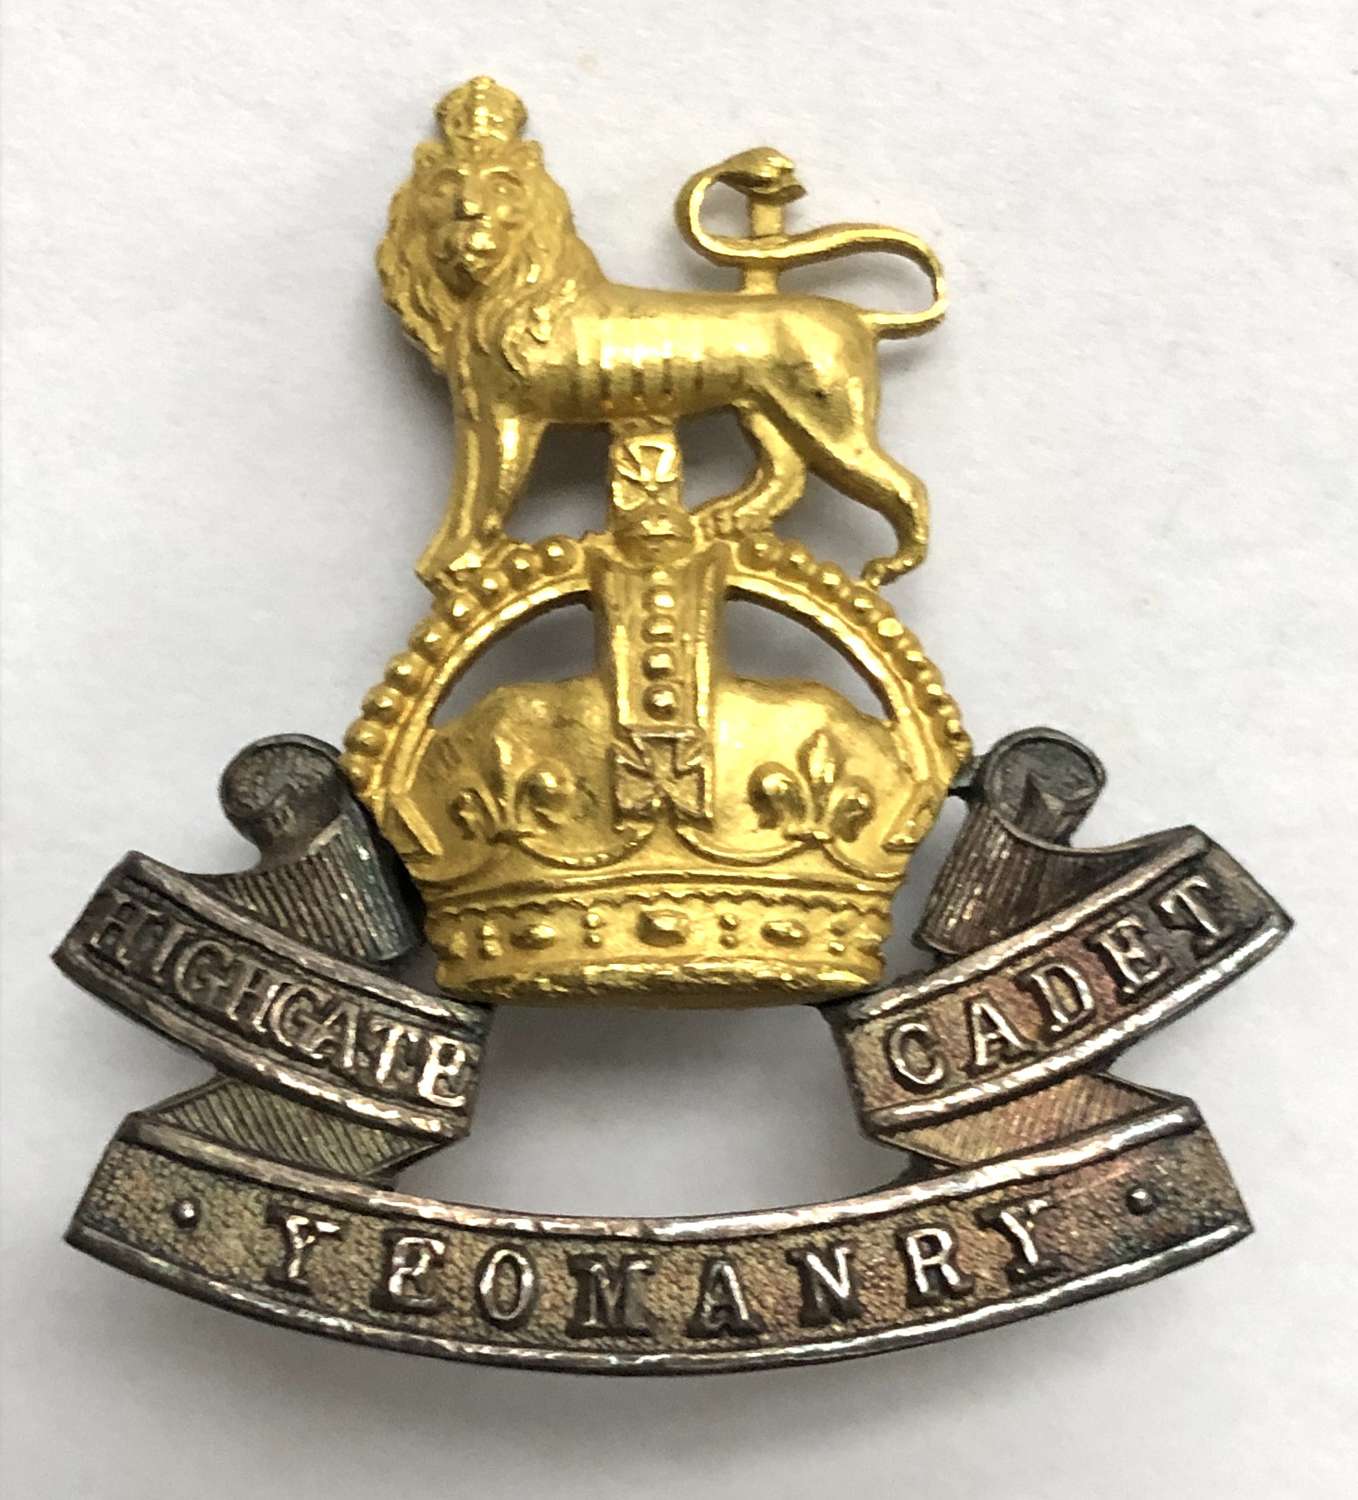 Highgate Yeomanry Cadets rare silver and gilt cap badge